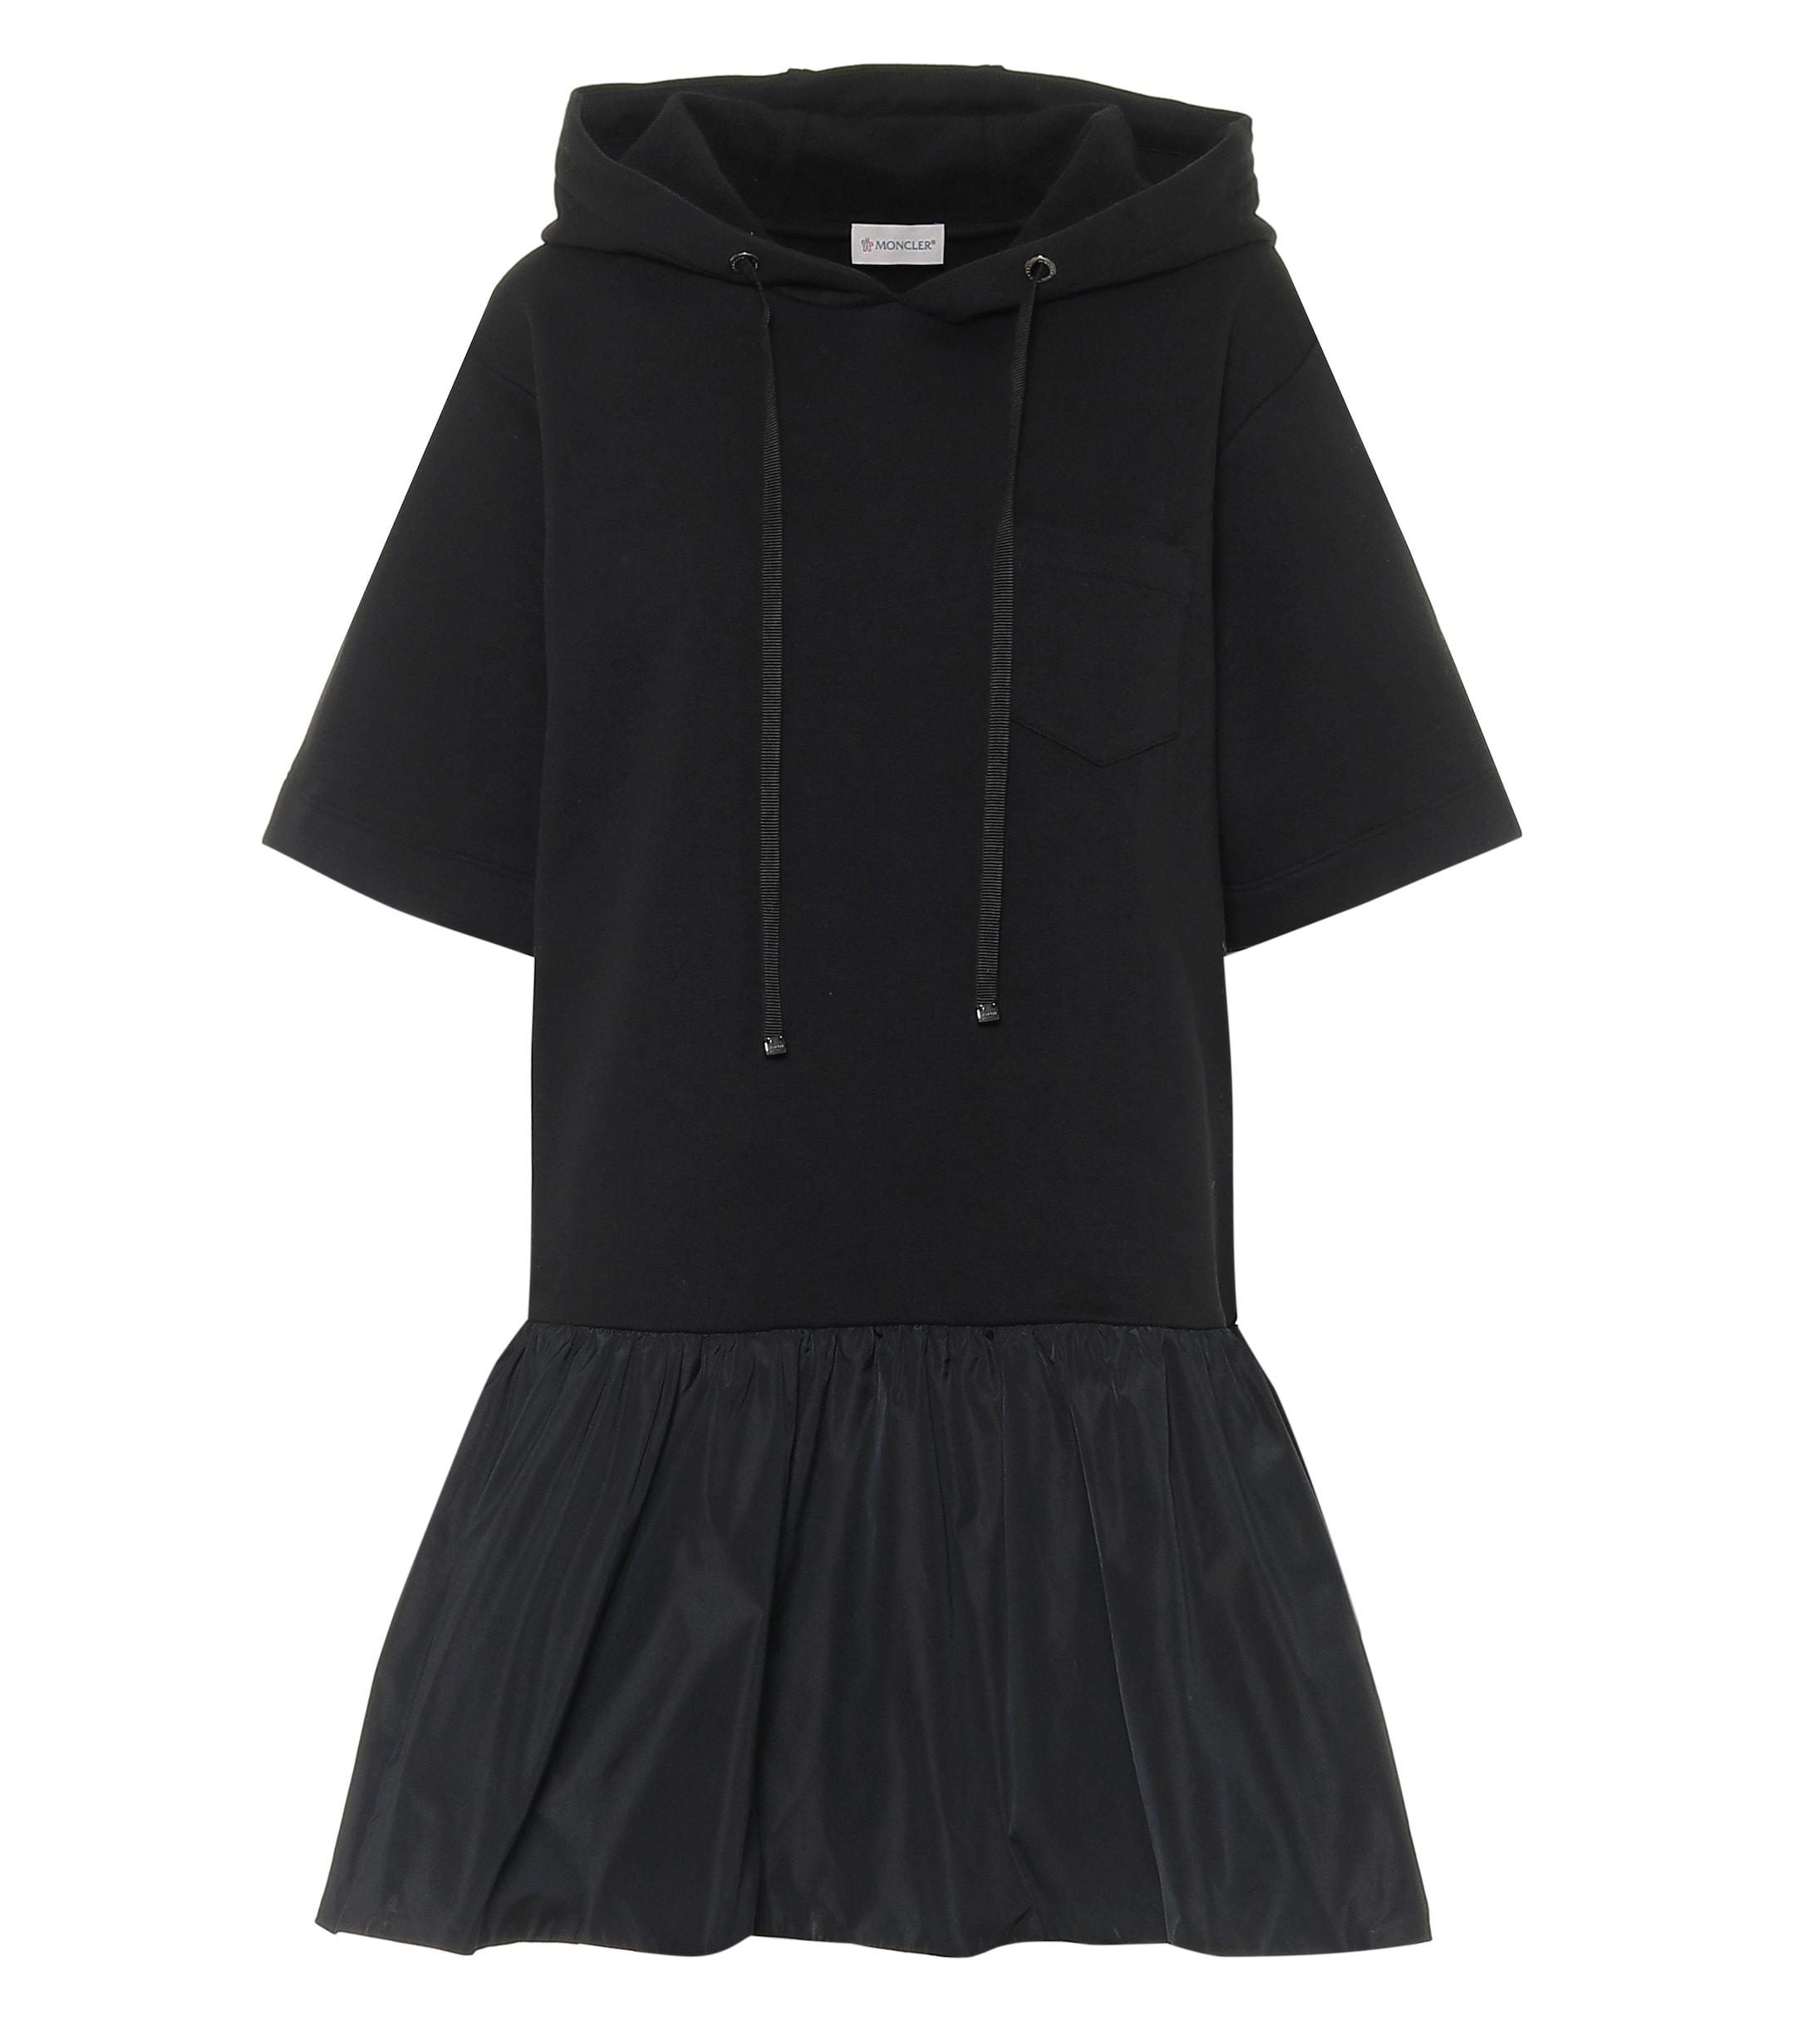 Moncler Cotton-jersey Dress in Black - Lyst